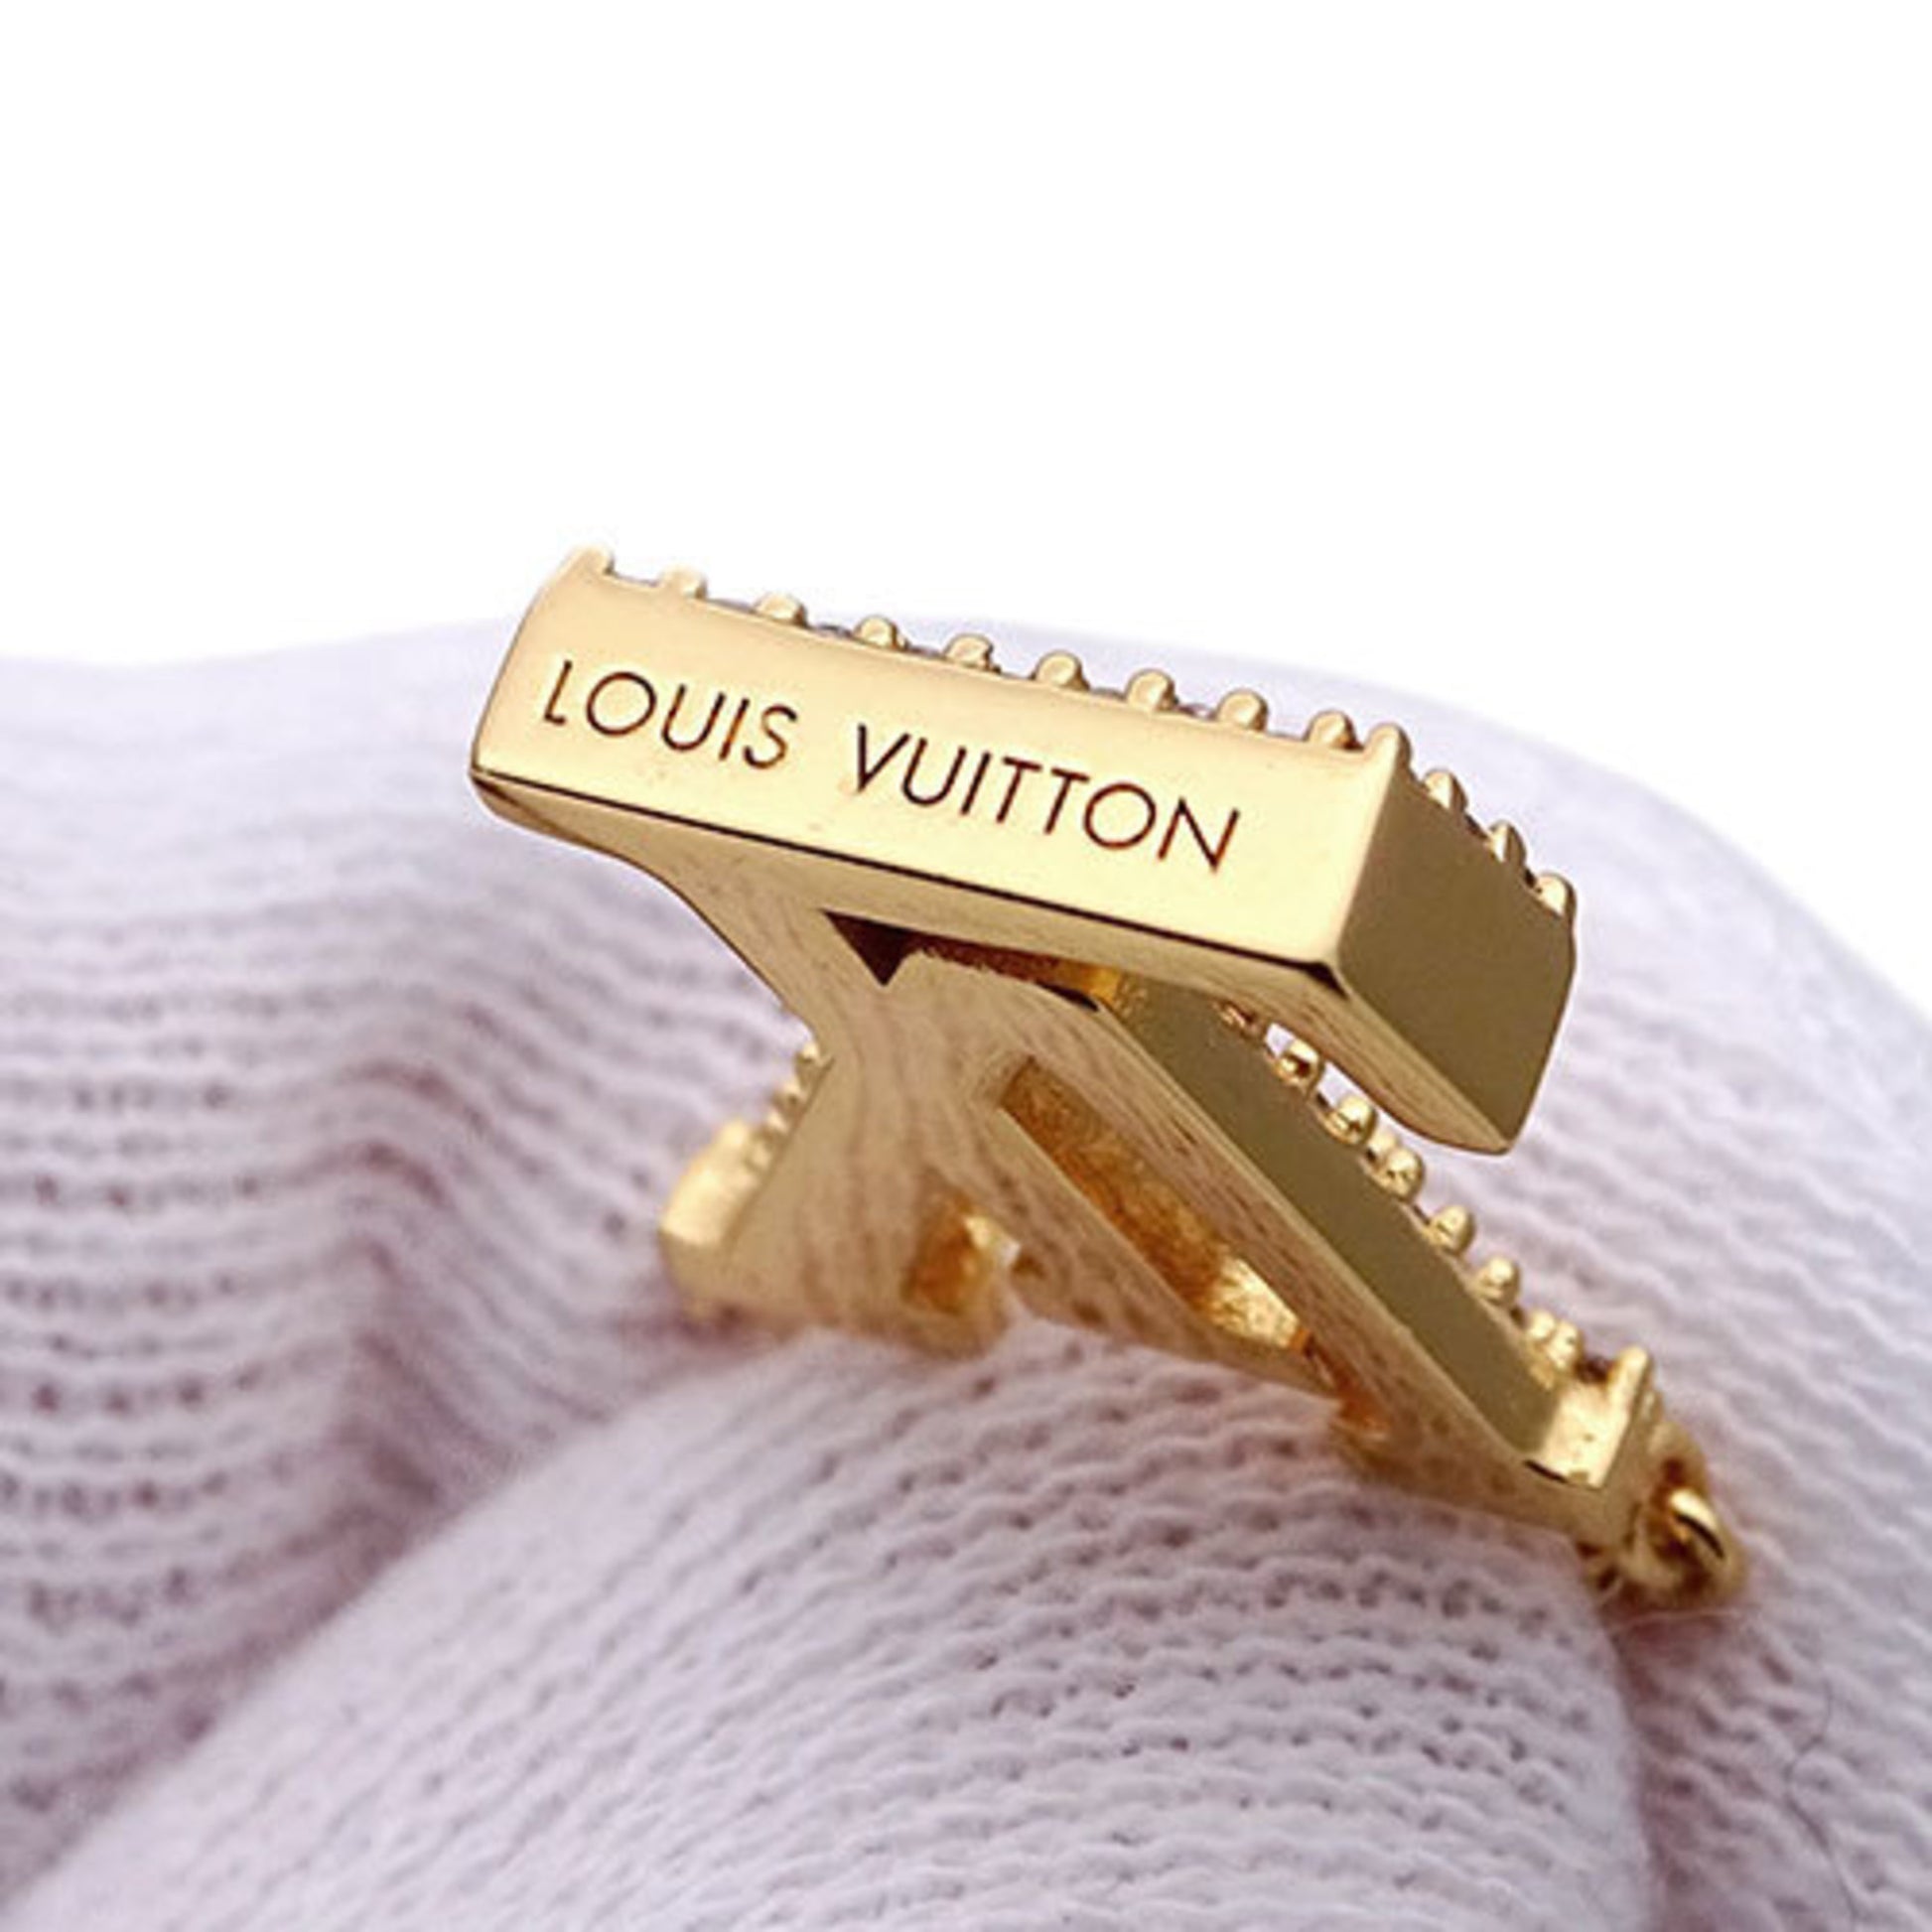 Louis Vuitton LV Iconic Necklace Product ID : M00596 Material: S00